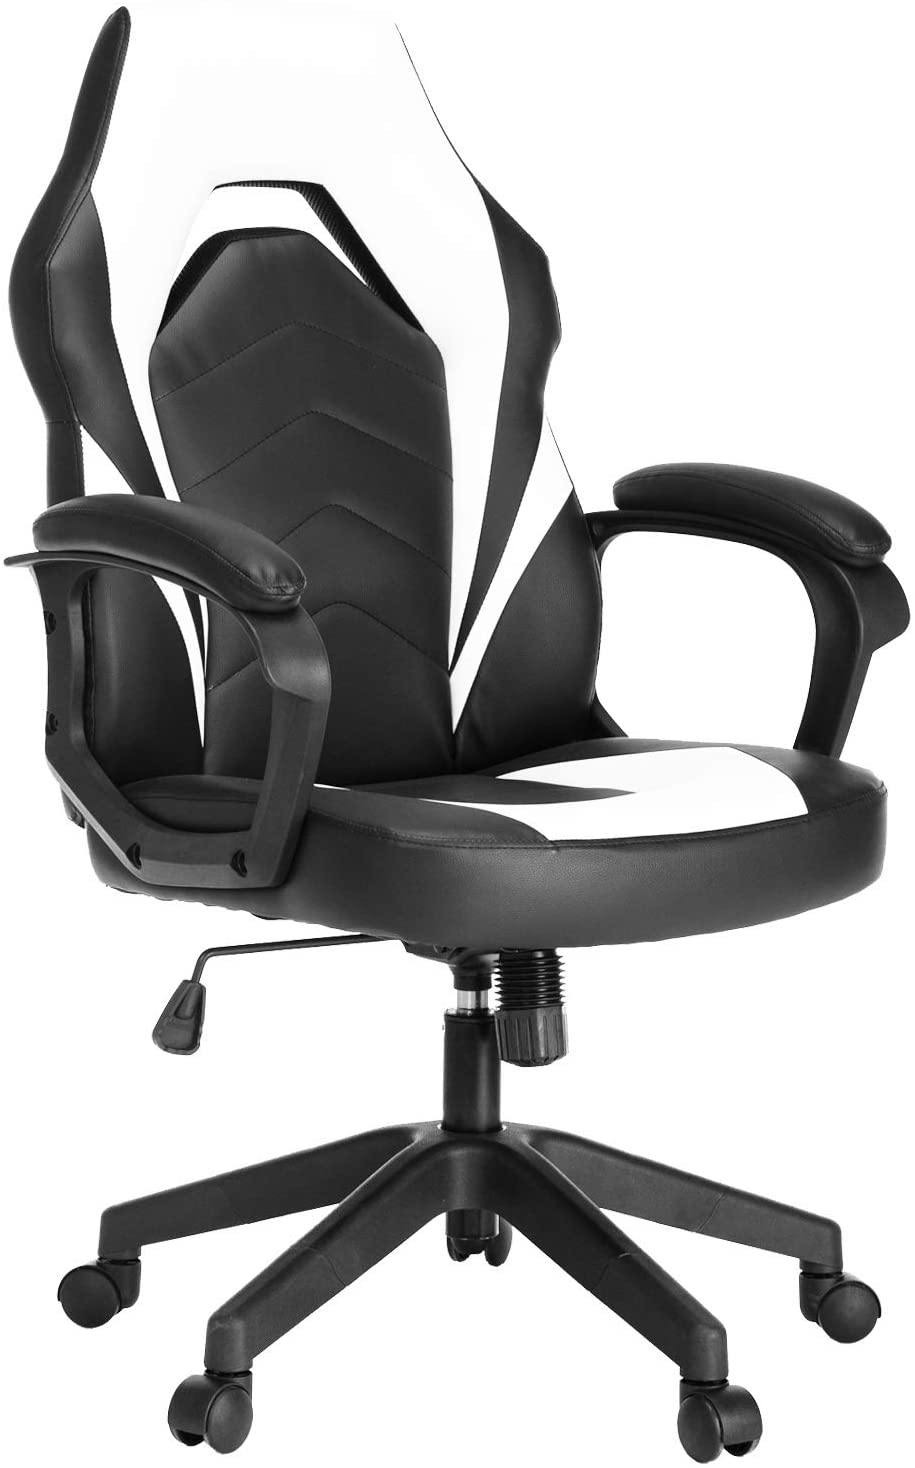 Leather Racing Gaming Chair  with Adjustable Height and Padding Armrest - AzraTec